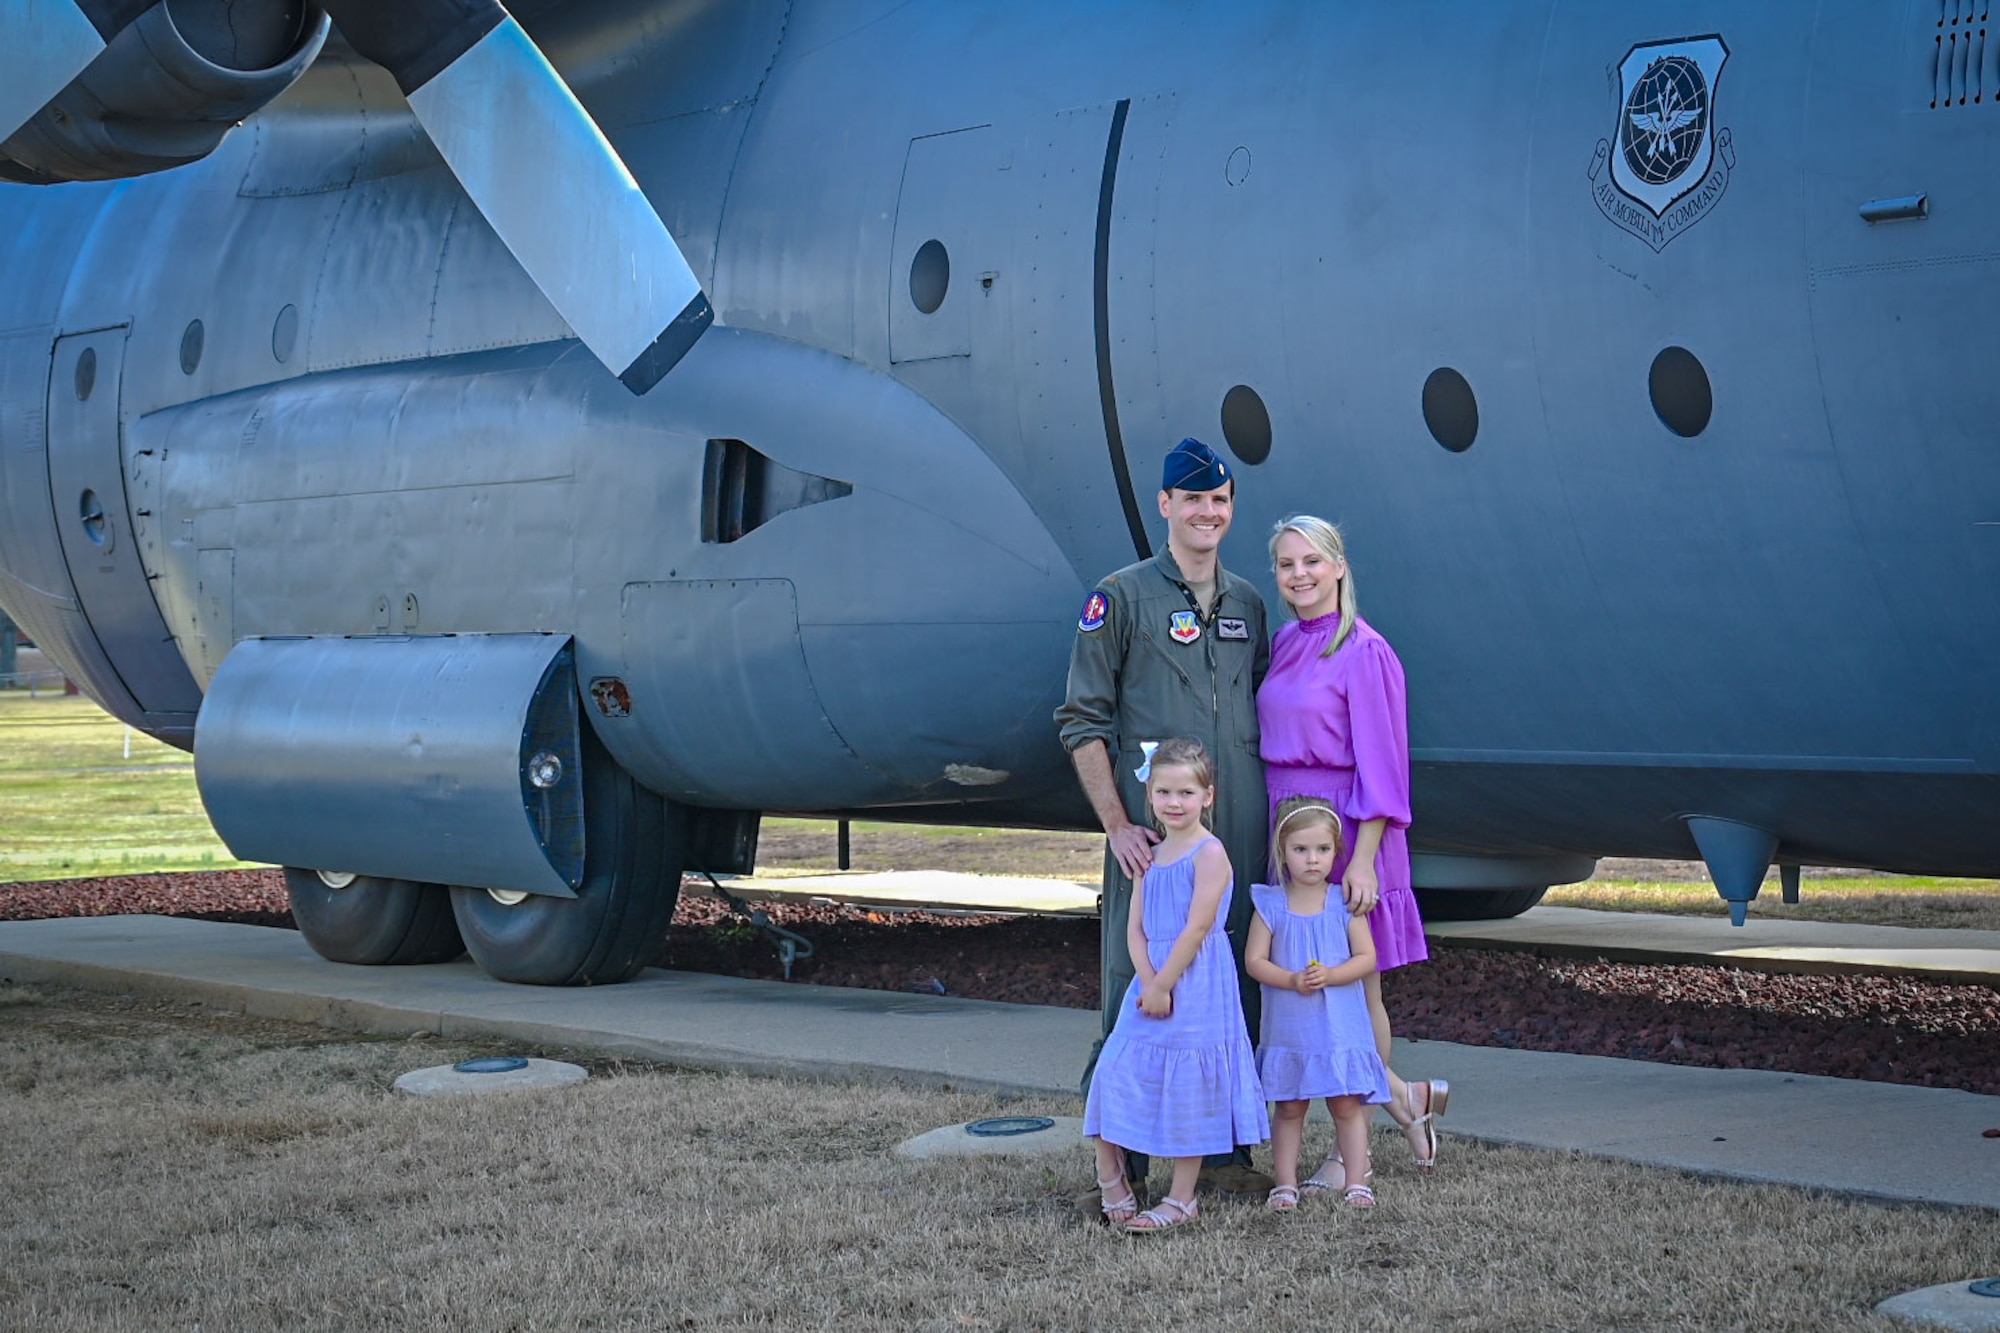 A man and woman pose for a photo with their two children outside next to a aircraft.